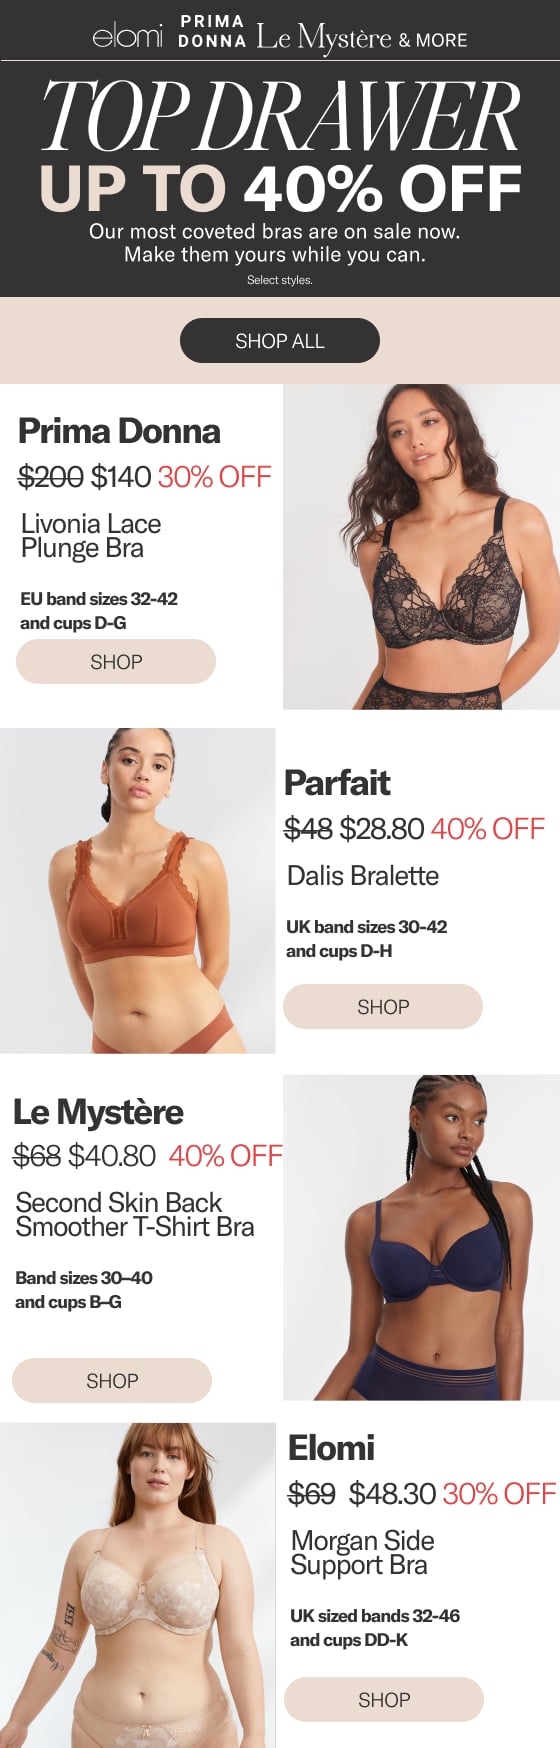 Up To 40% Off The BEST Bra Styles  Top Drawer Event - Bare Necessities